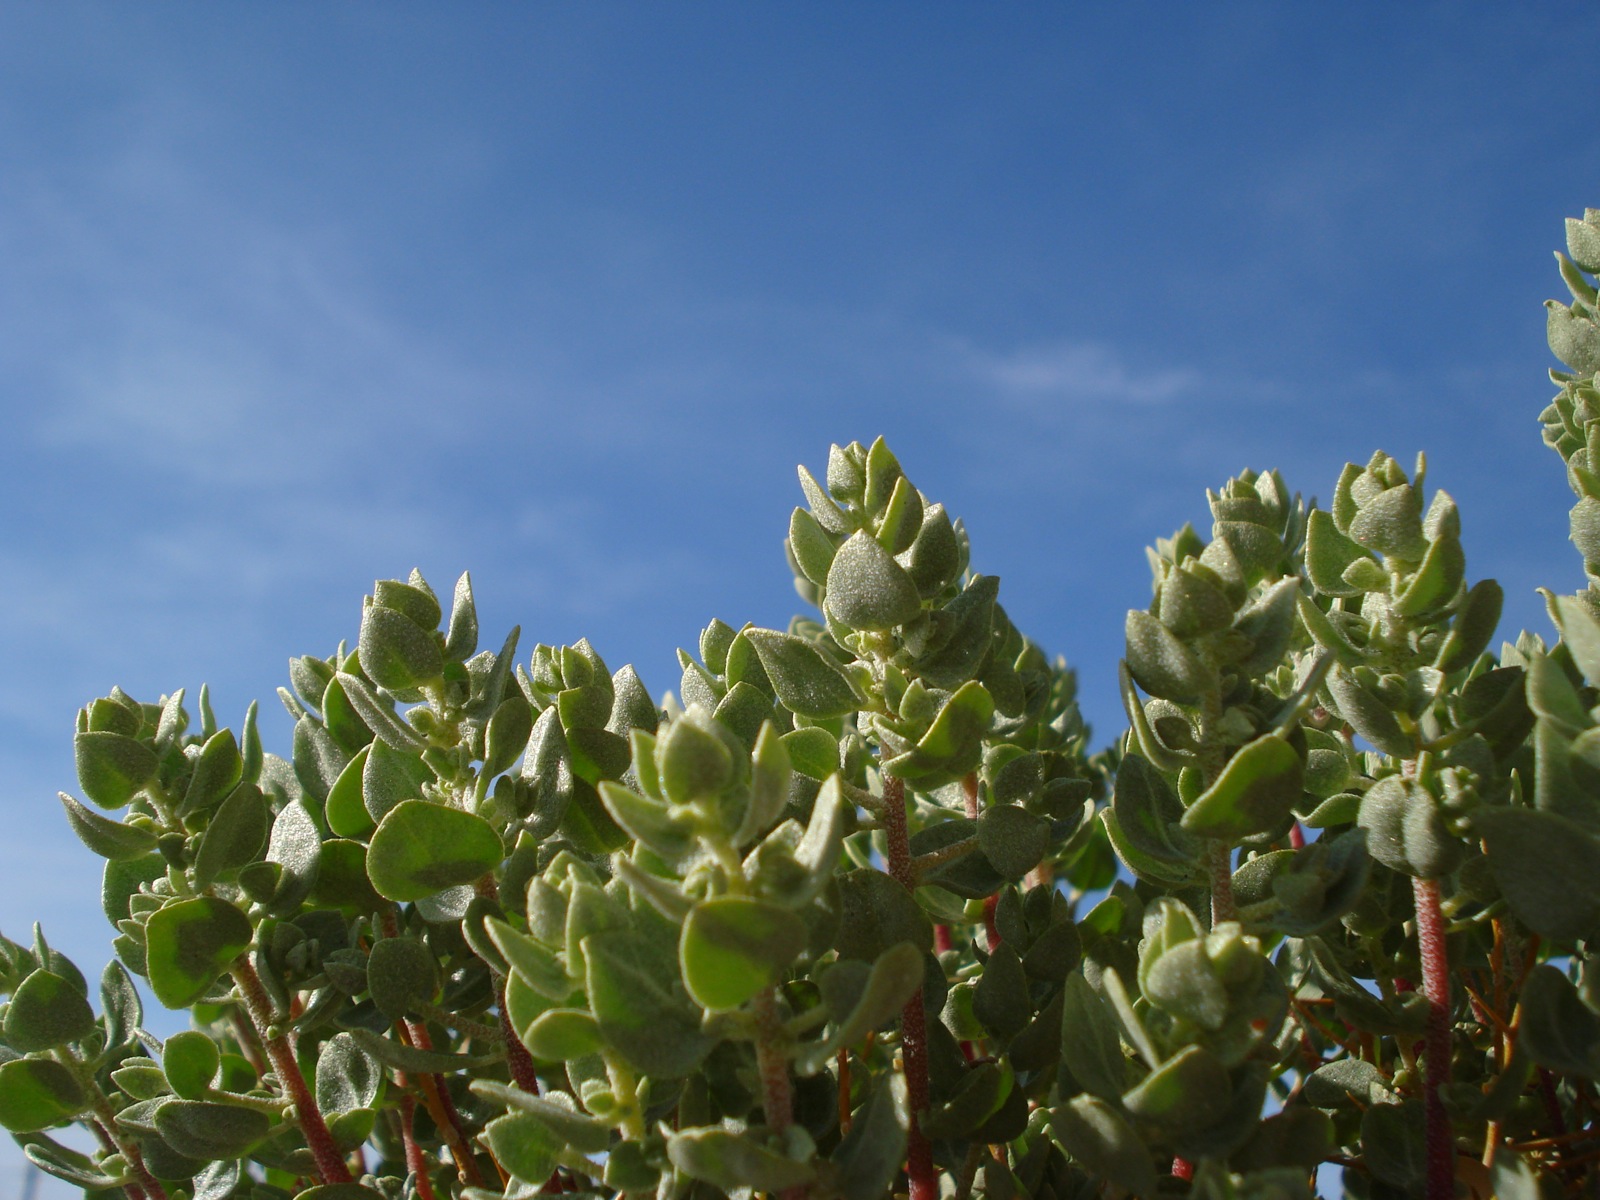 green plants under a blue sky in the sunshine